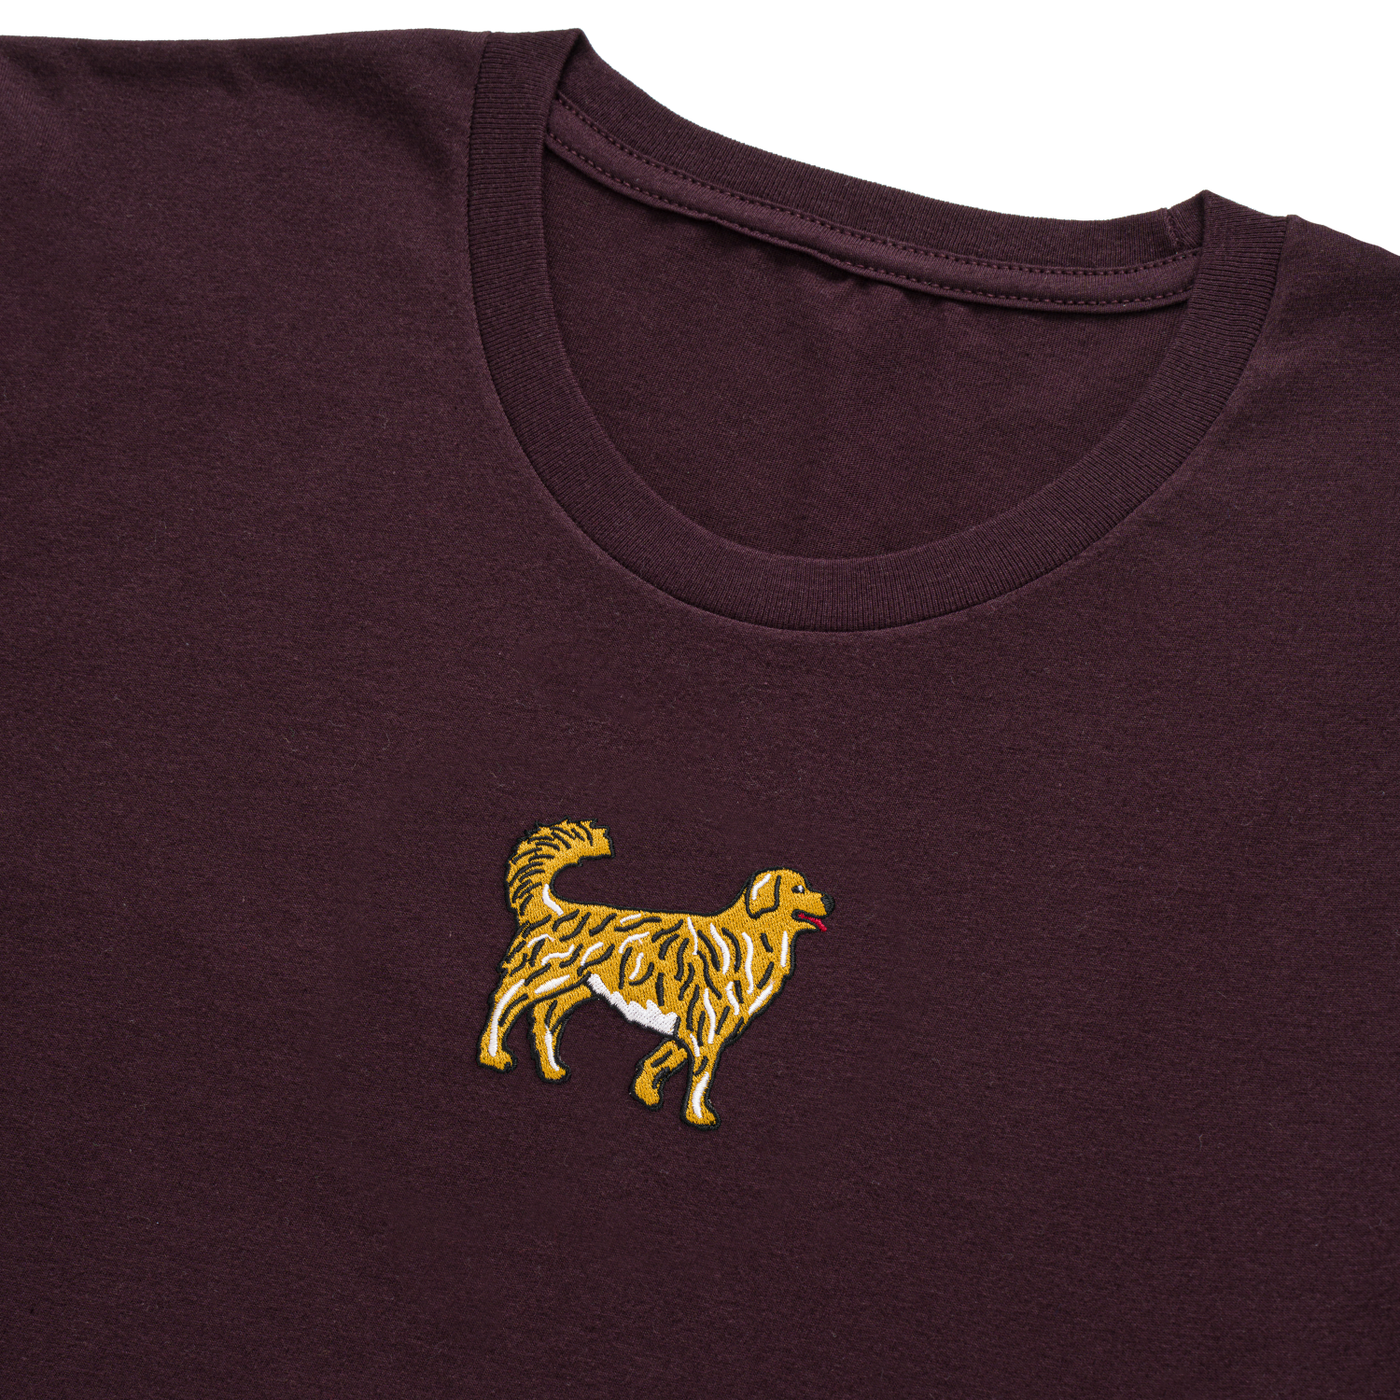 Bobby's Planet Men's Embroidered Golden Retriever T-Shirt from Paws Dog Cat Animals Collection in Oxblood Color#color_oxblood